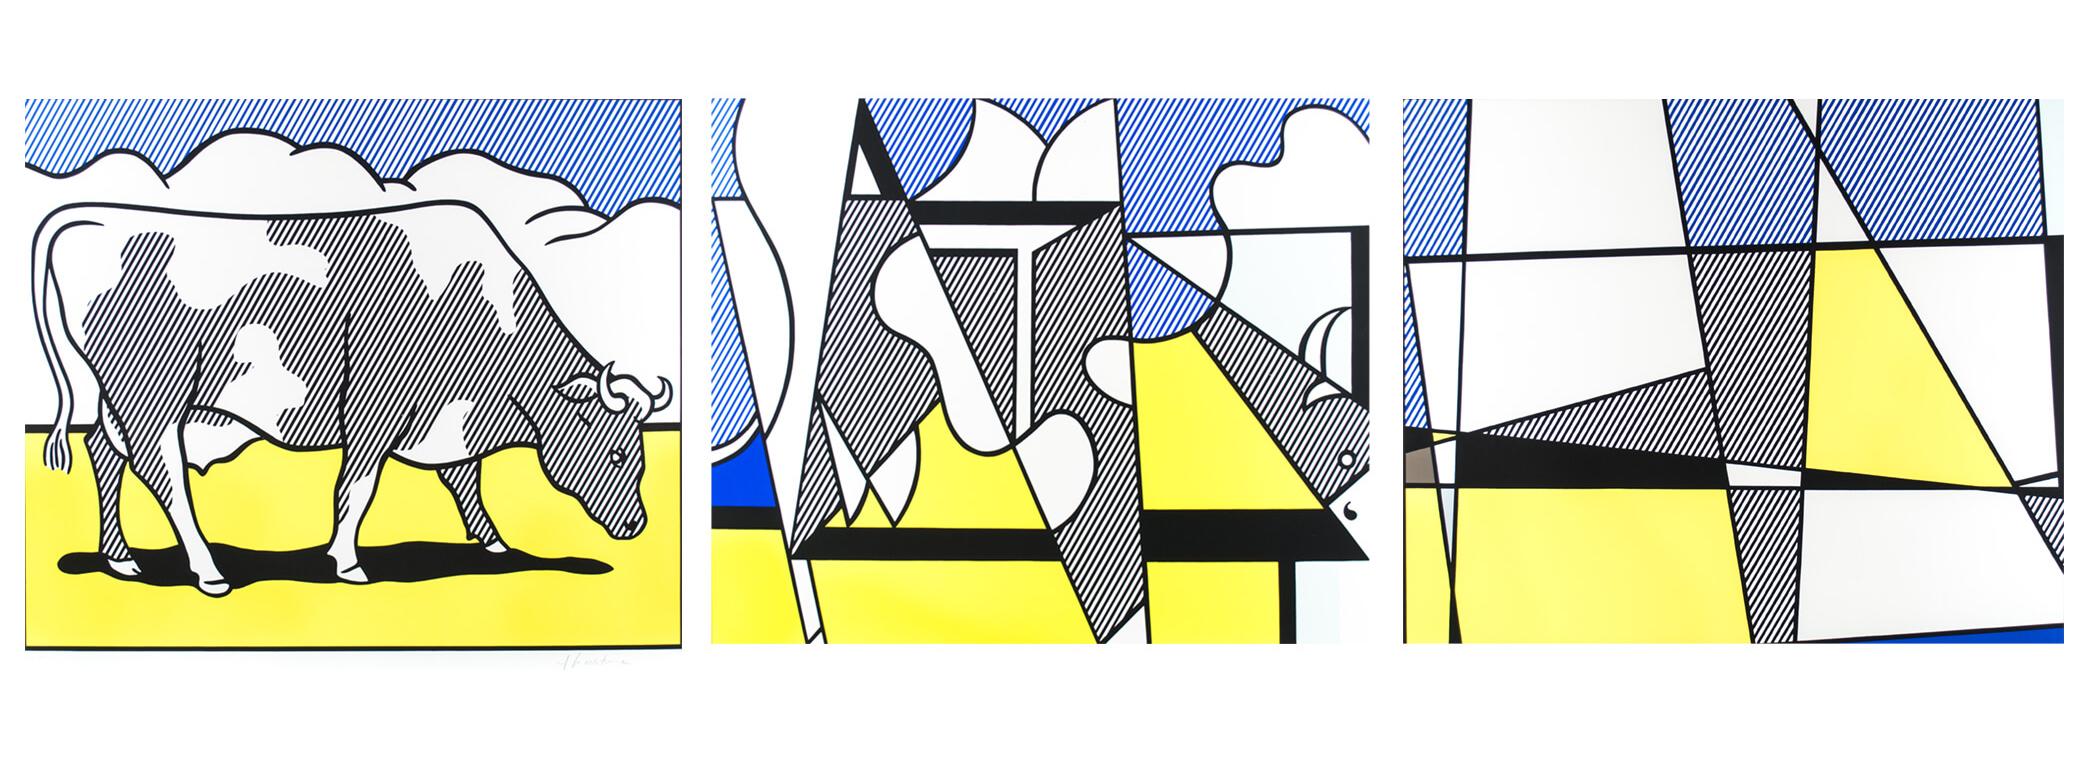 Roy Lichtenstein Abstract Print - Cow Going Abstract (Triptych)